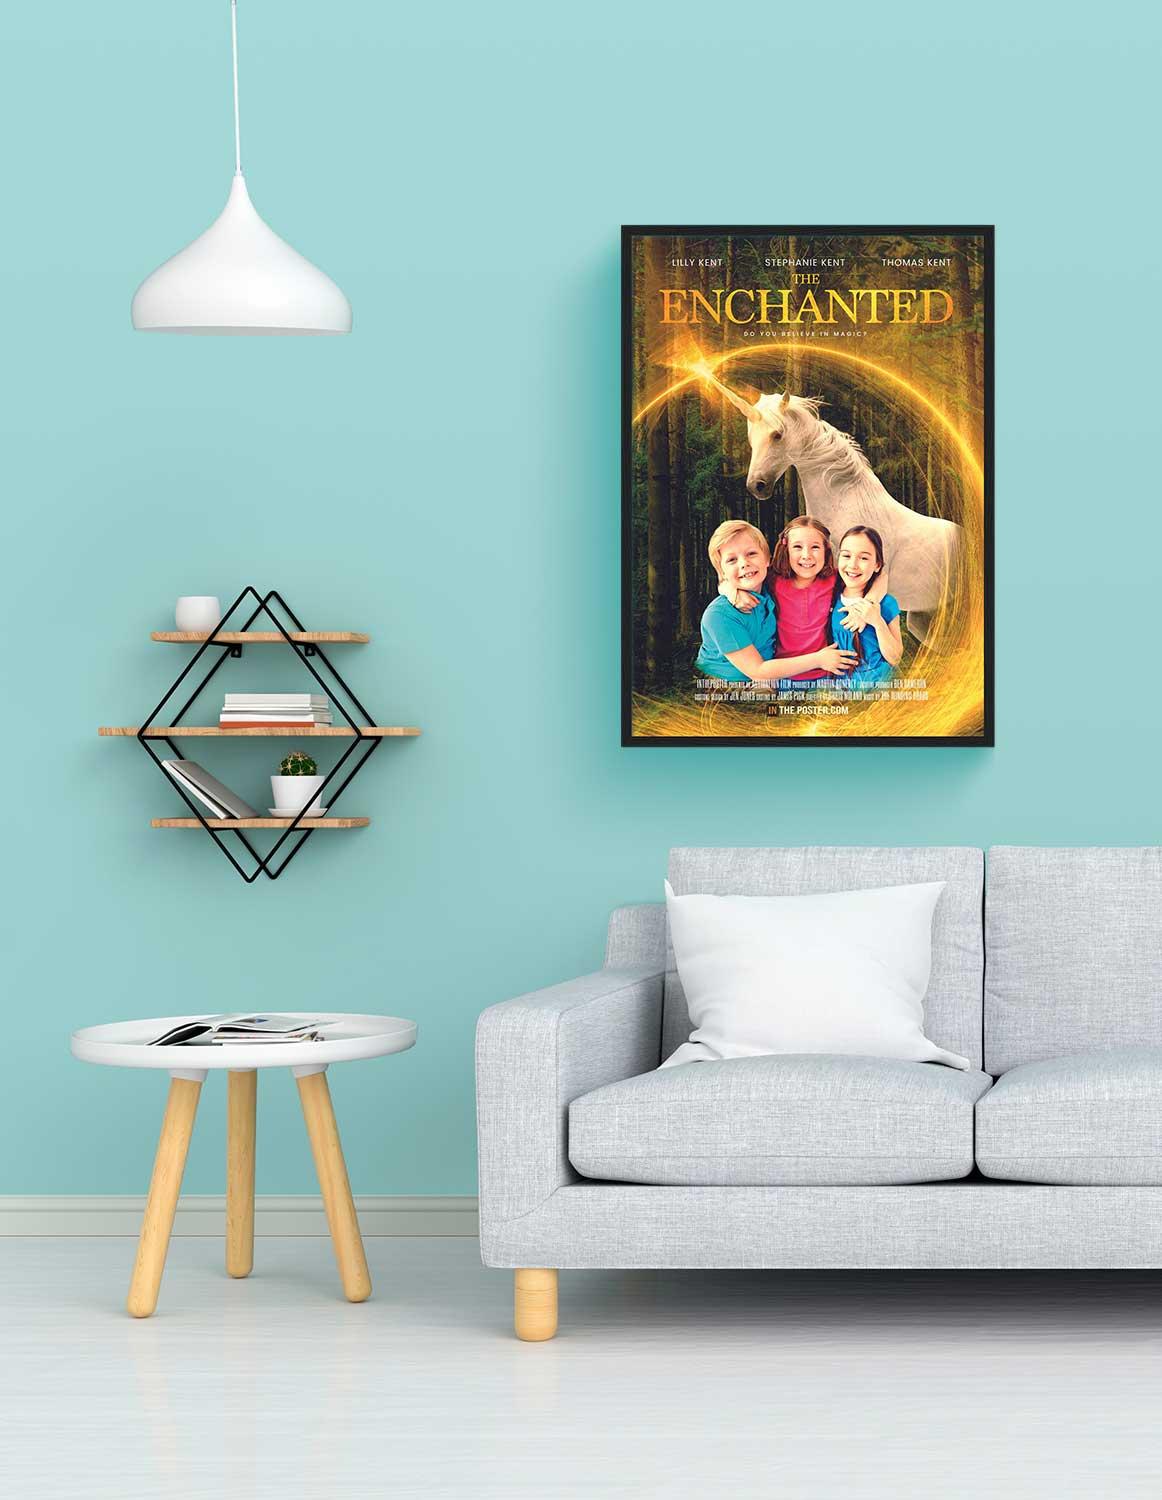 A unicorn movie poster in a regular black frame above a grey sofa